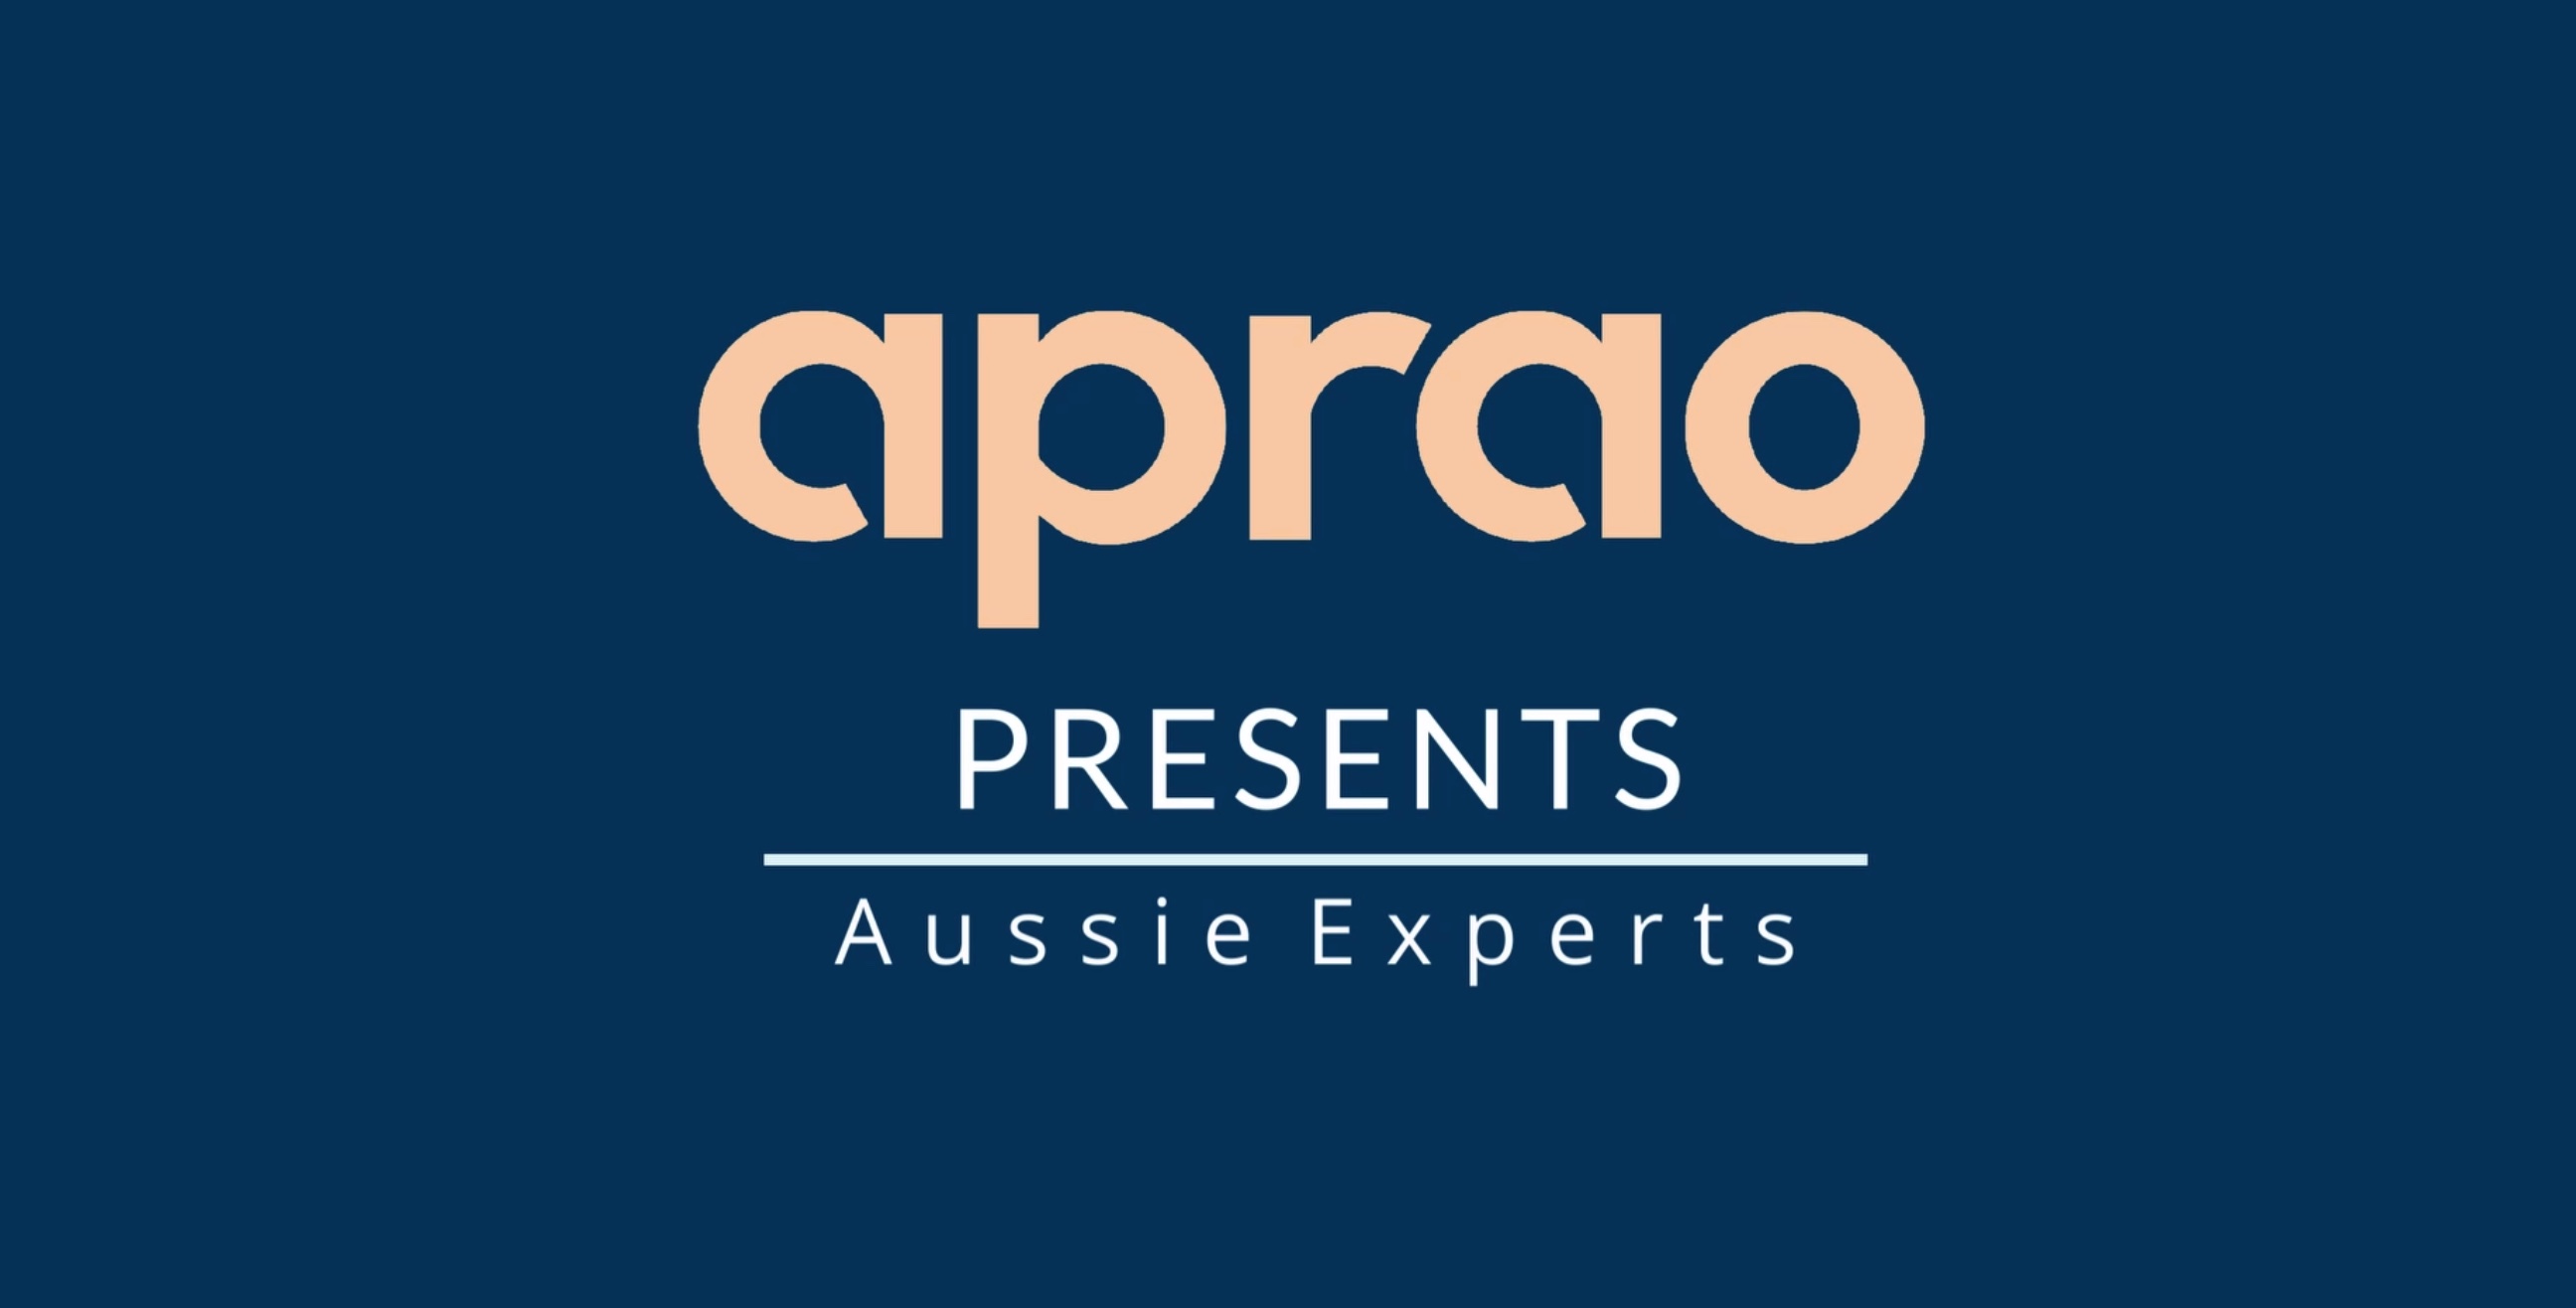 Aprao presents...Aussie experts; a webinar series featuring interviews with experts in the Australian property development market.